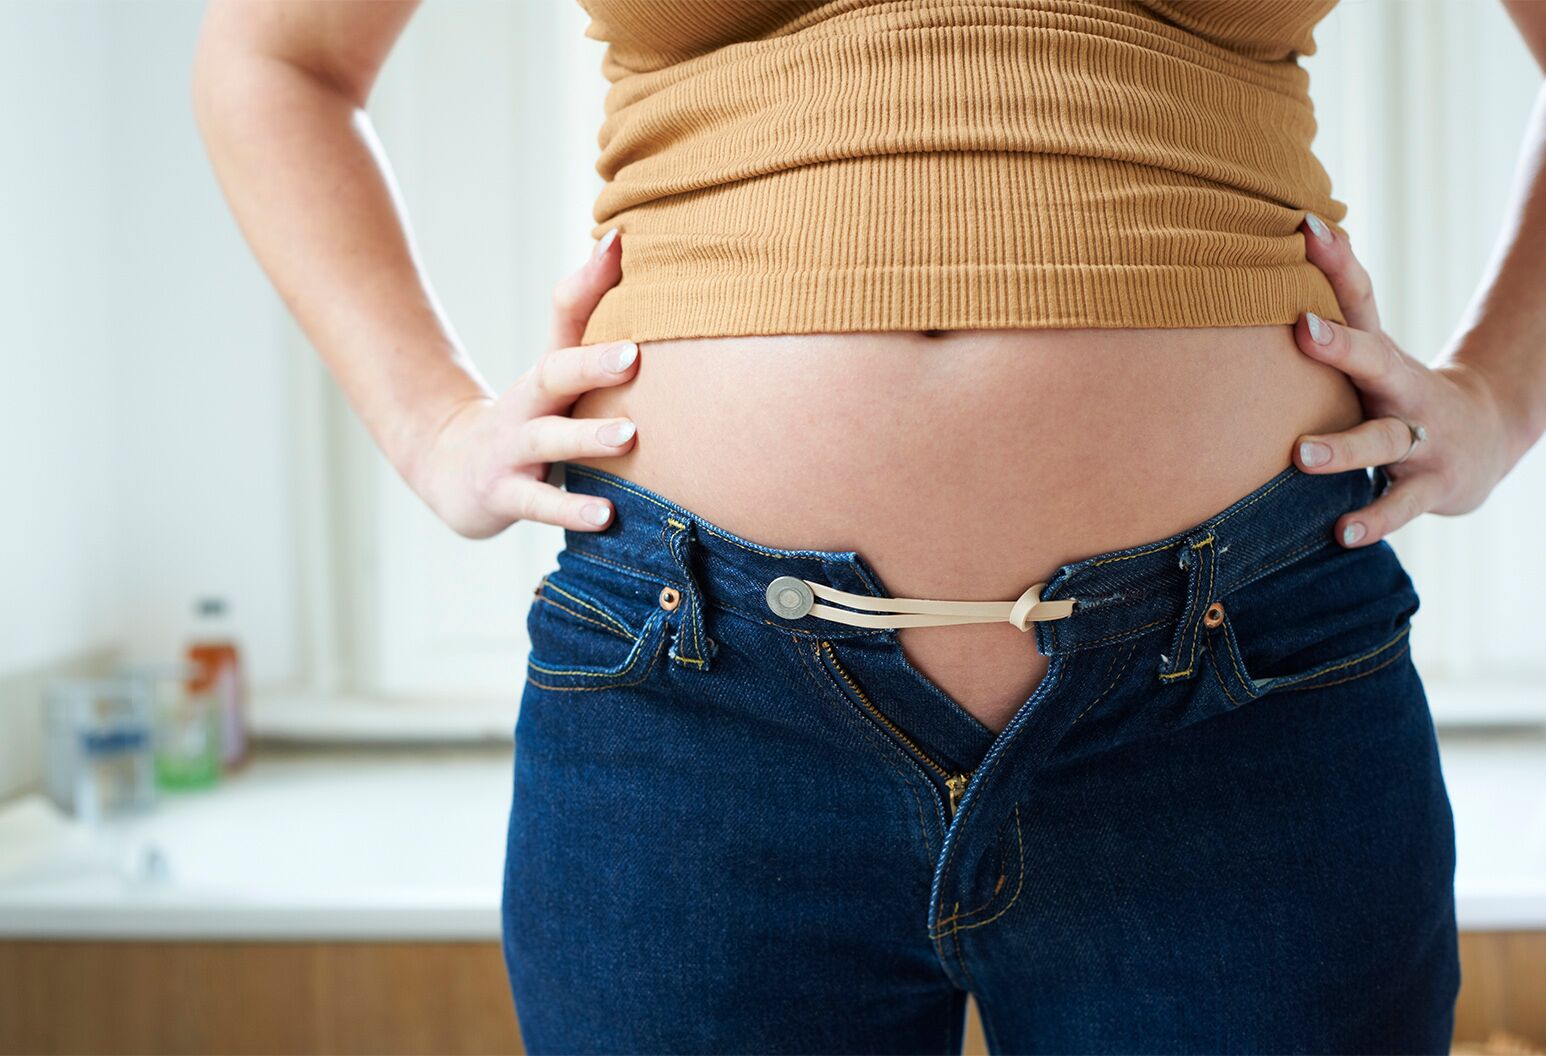 5 Foods that help deal with Bloating